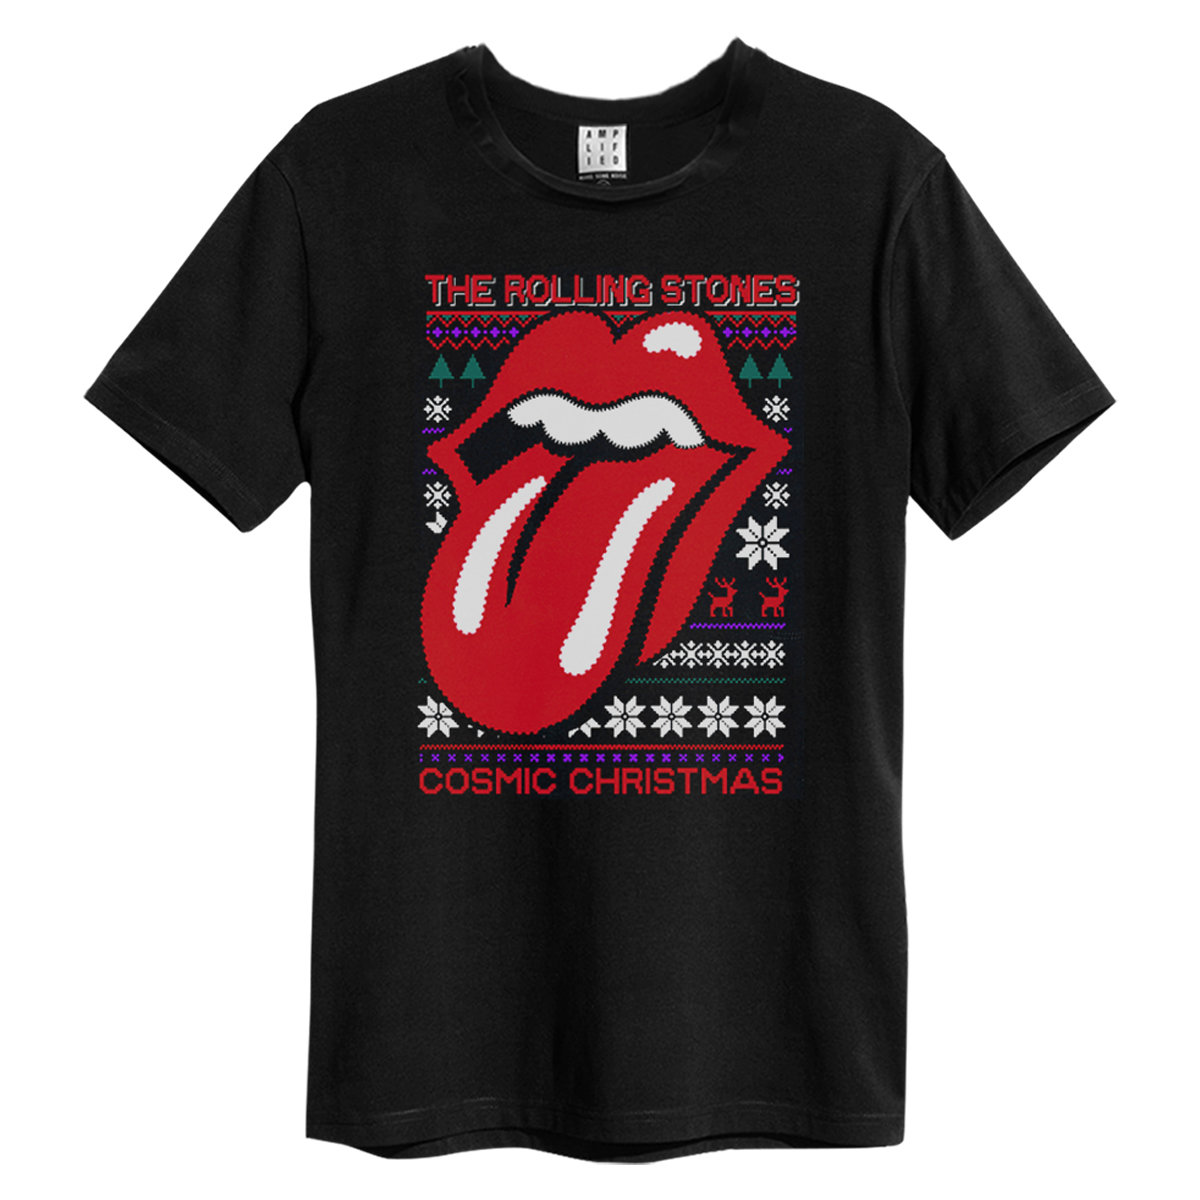 THE ROLLING STONES - COSMIC CHRISTMAS